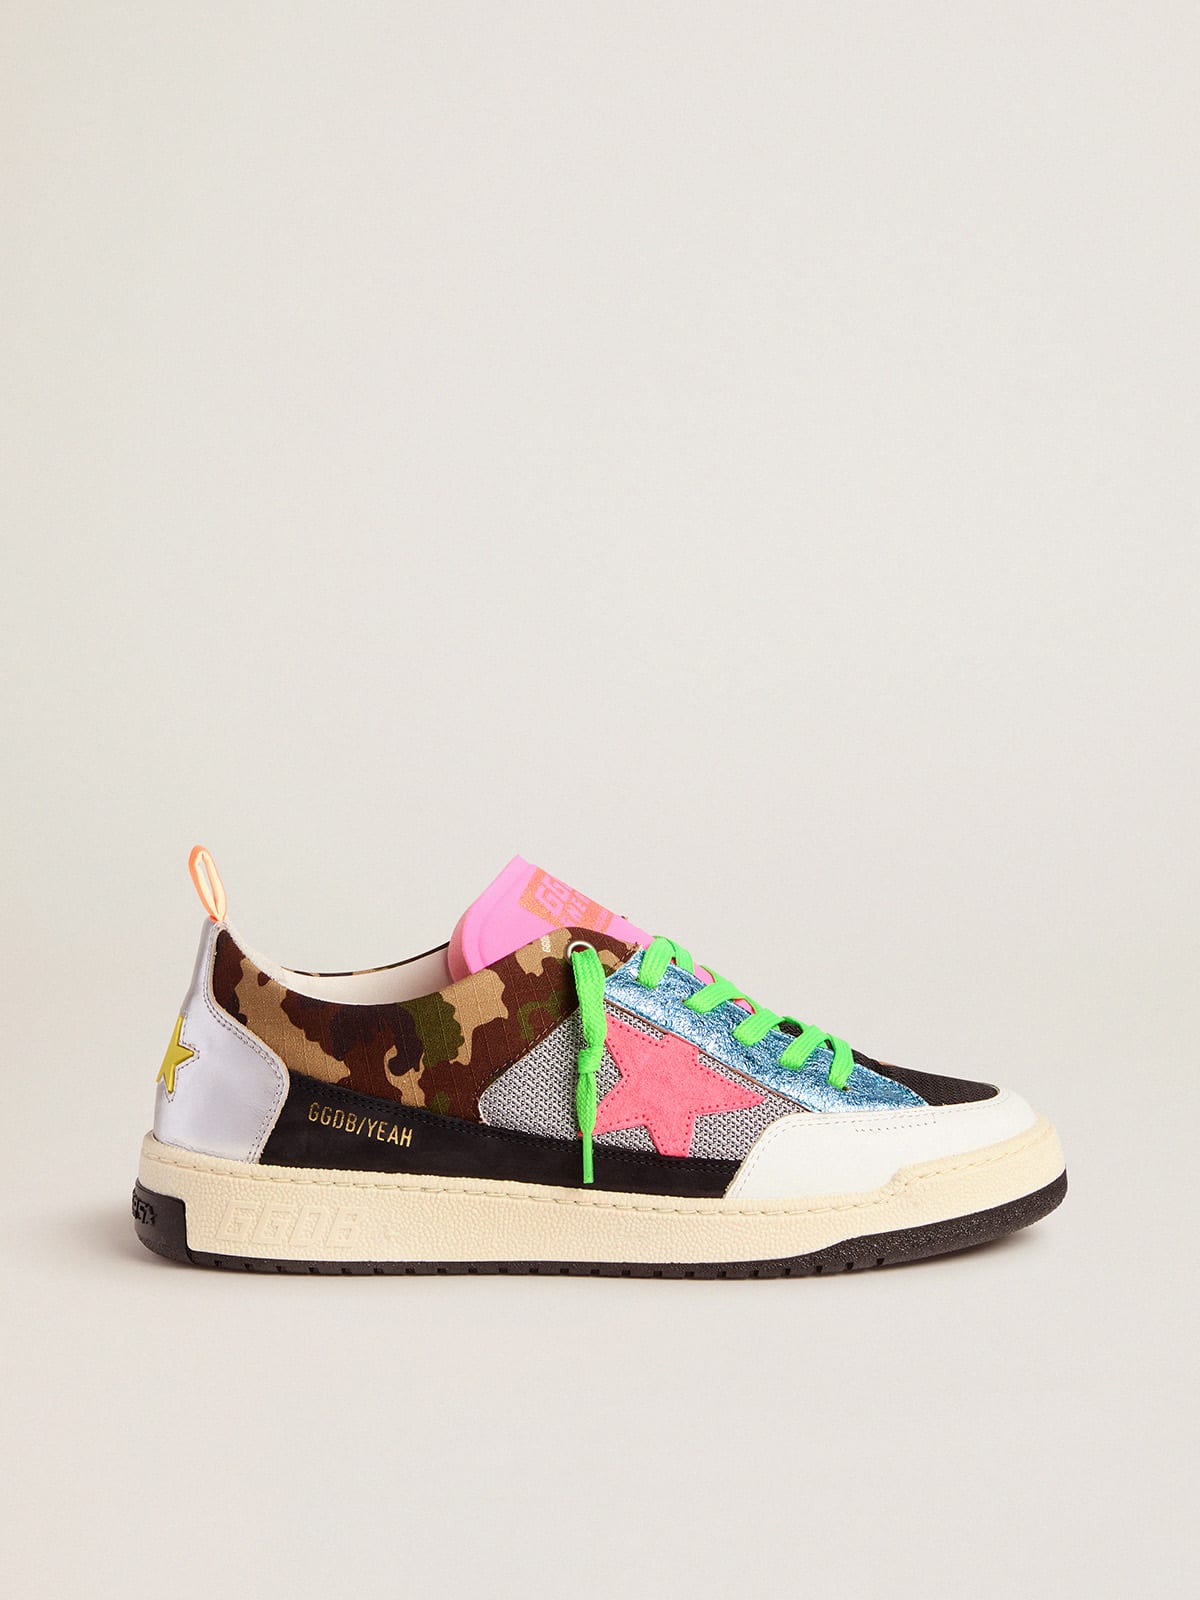 Men\'s camouflage Yeah sneakers with fuchsia star | Golden Goose